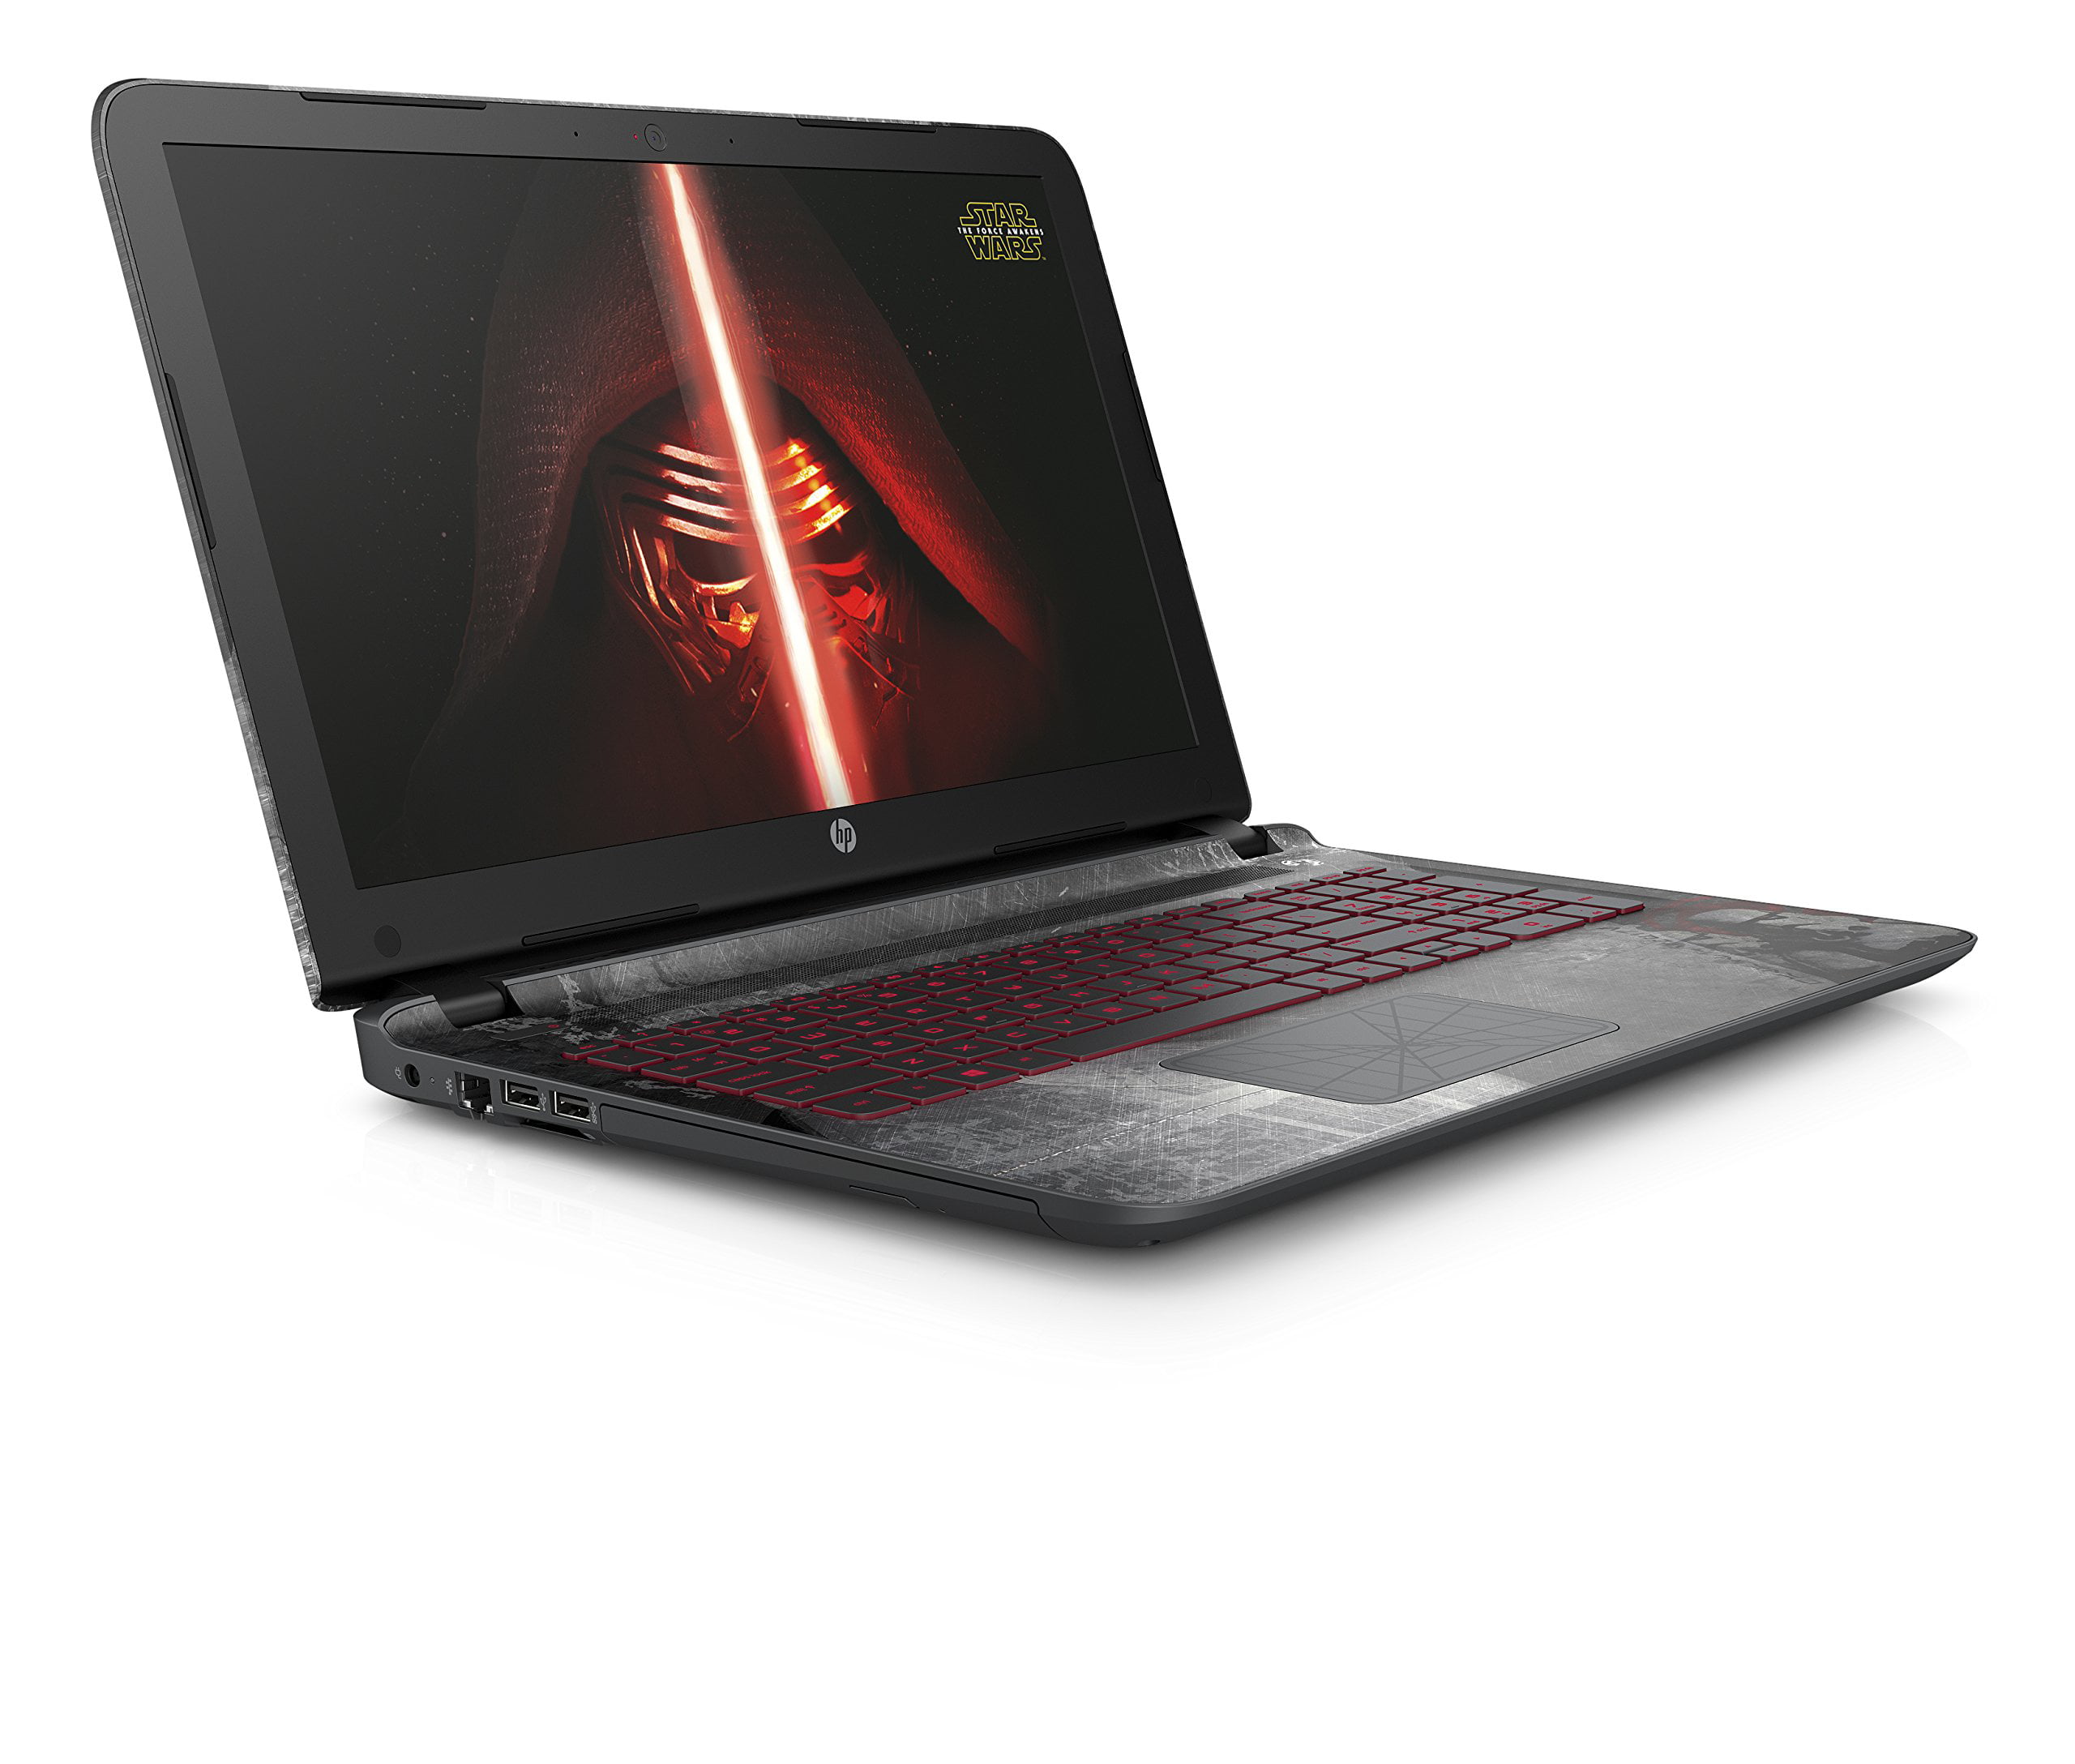 Review: HP Star Wars Limited Edition Gaming Laptop